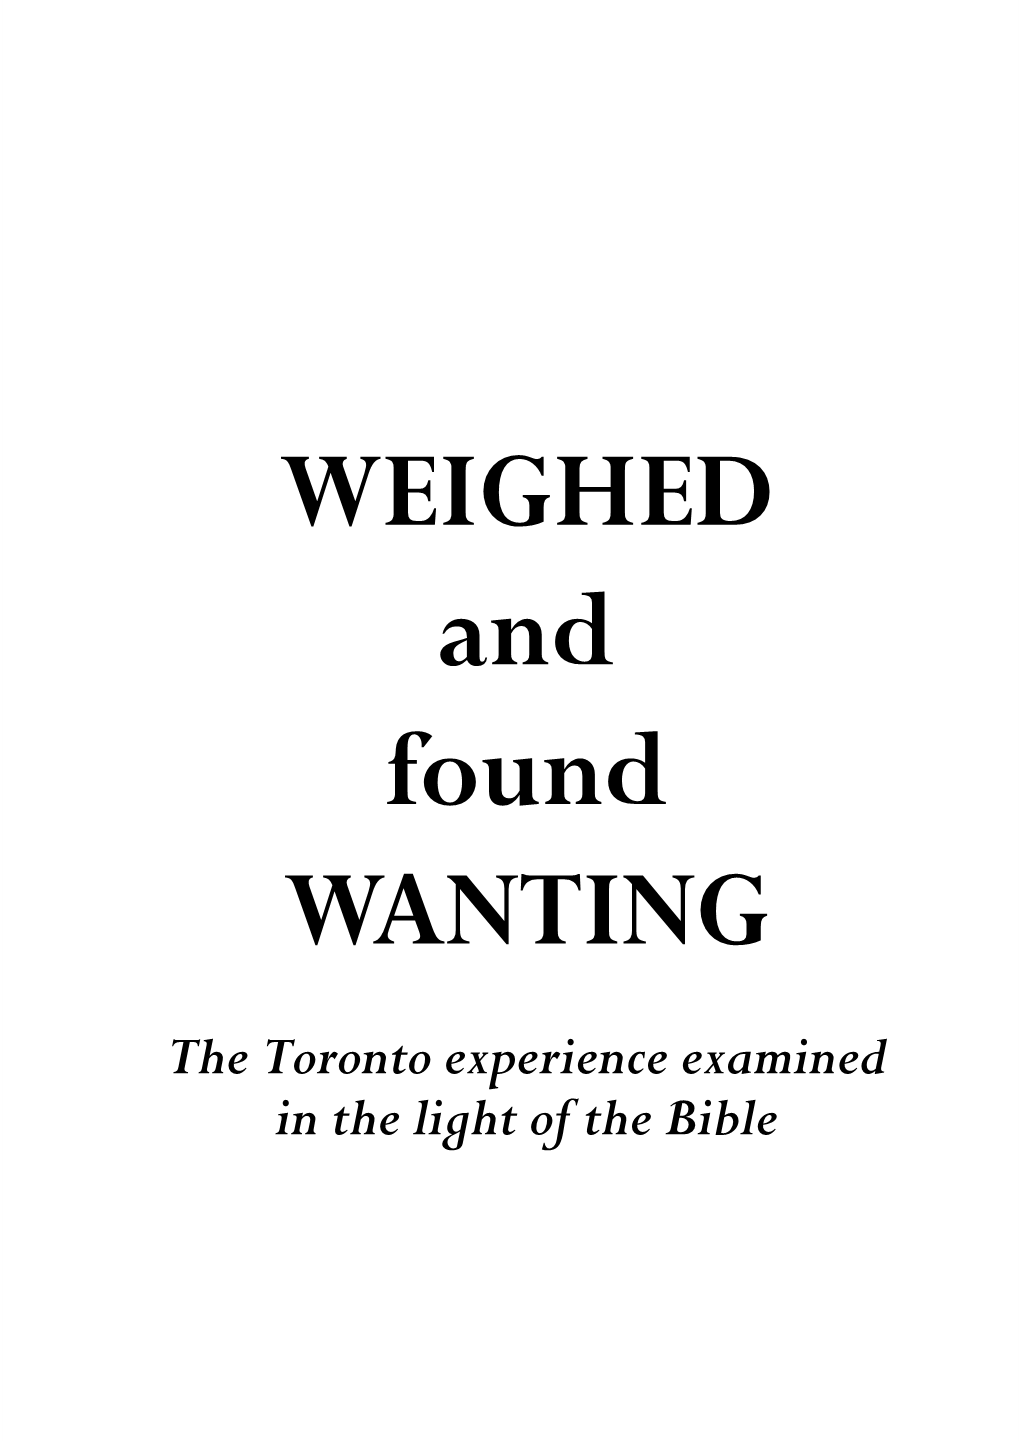 WEIGHED and Found WANTING the Toronto Experience Examined in the Light of the Bible